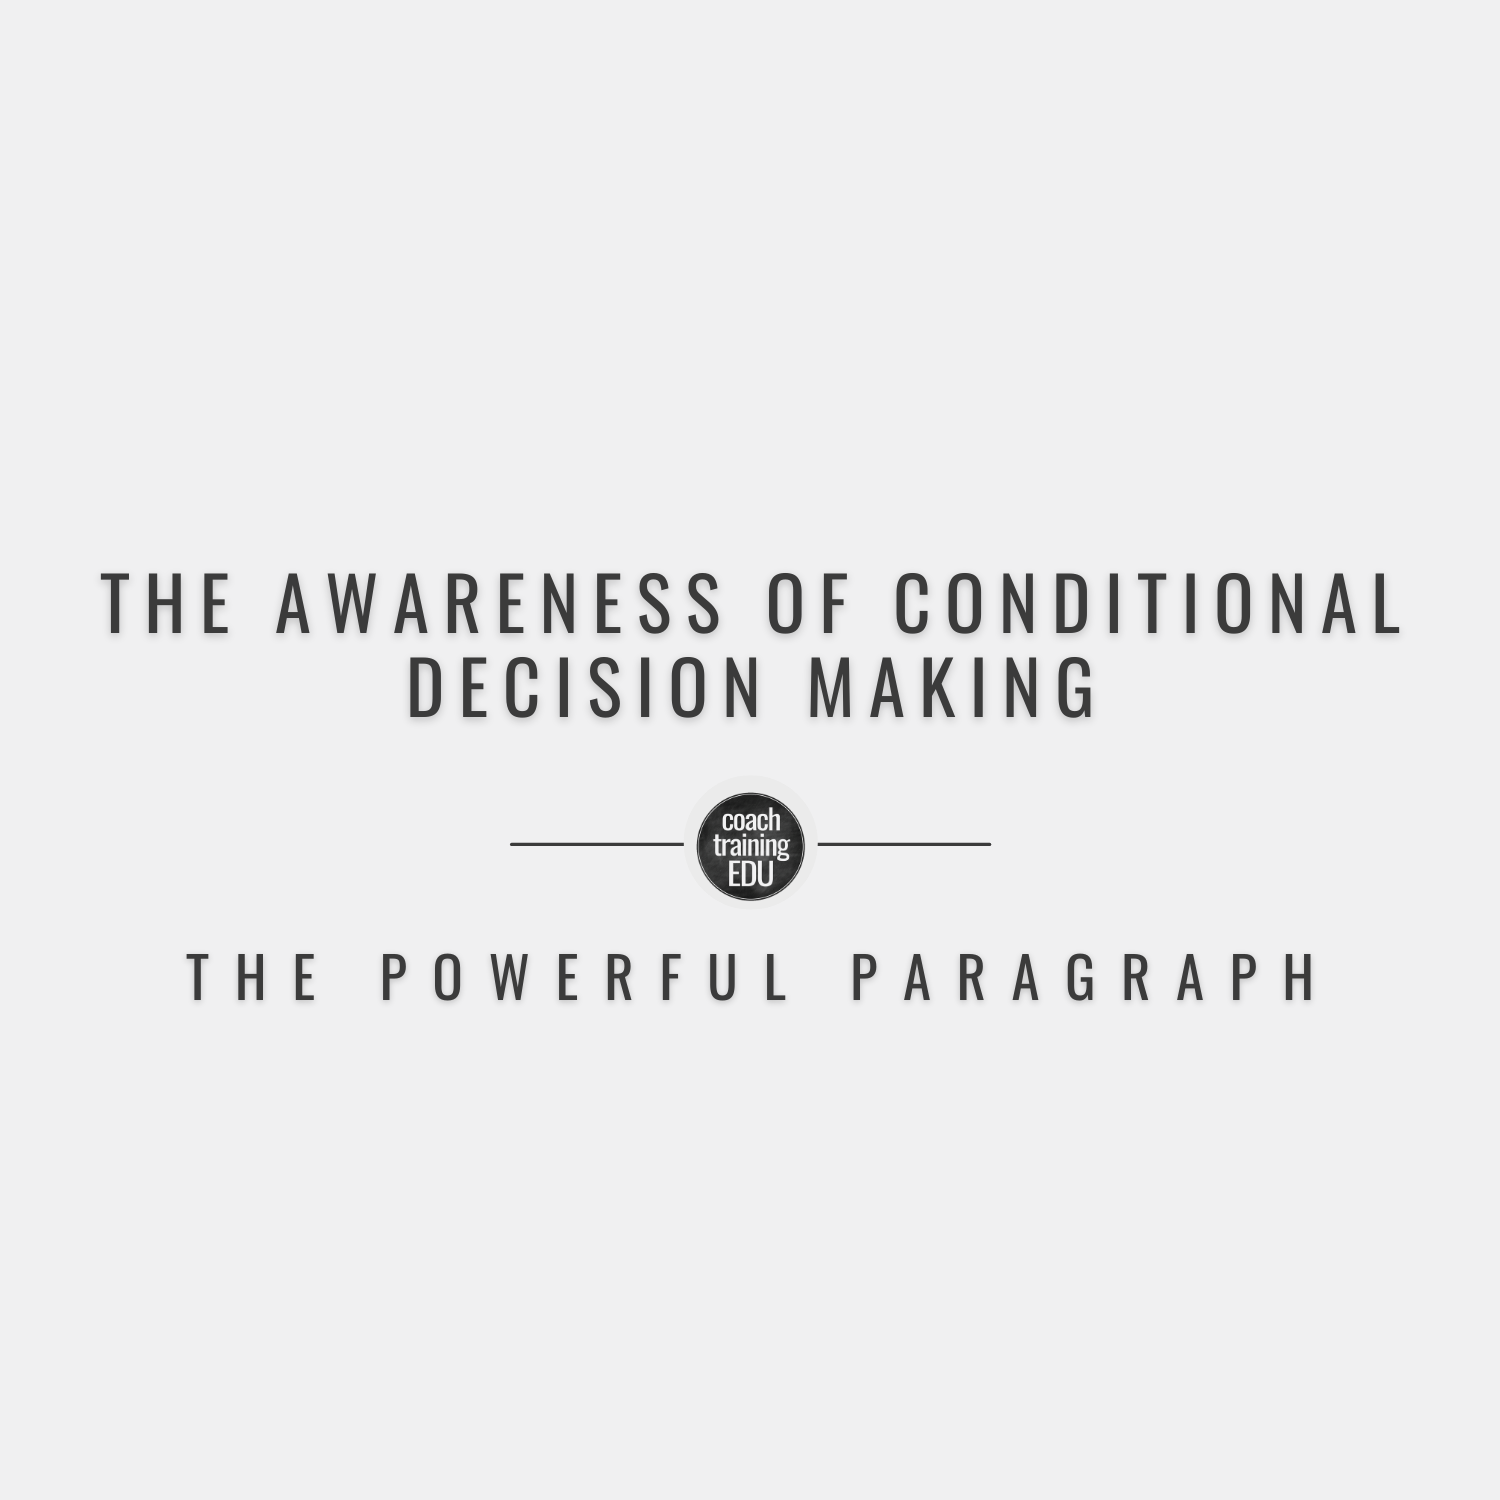 The Awareness of Conditional Decision Making